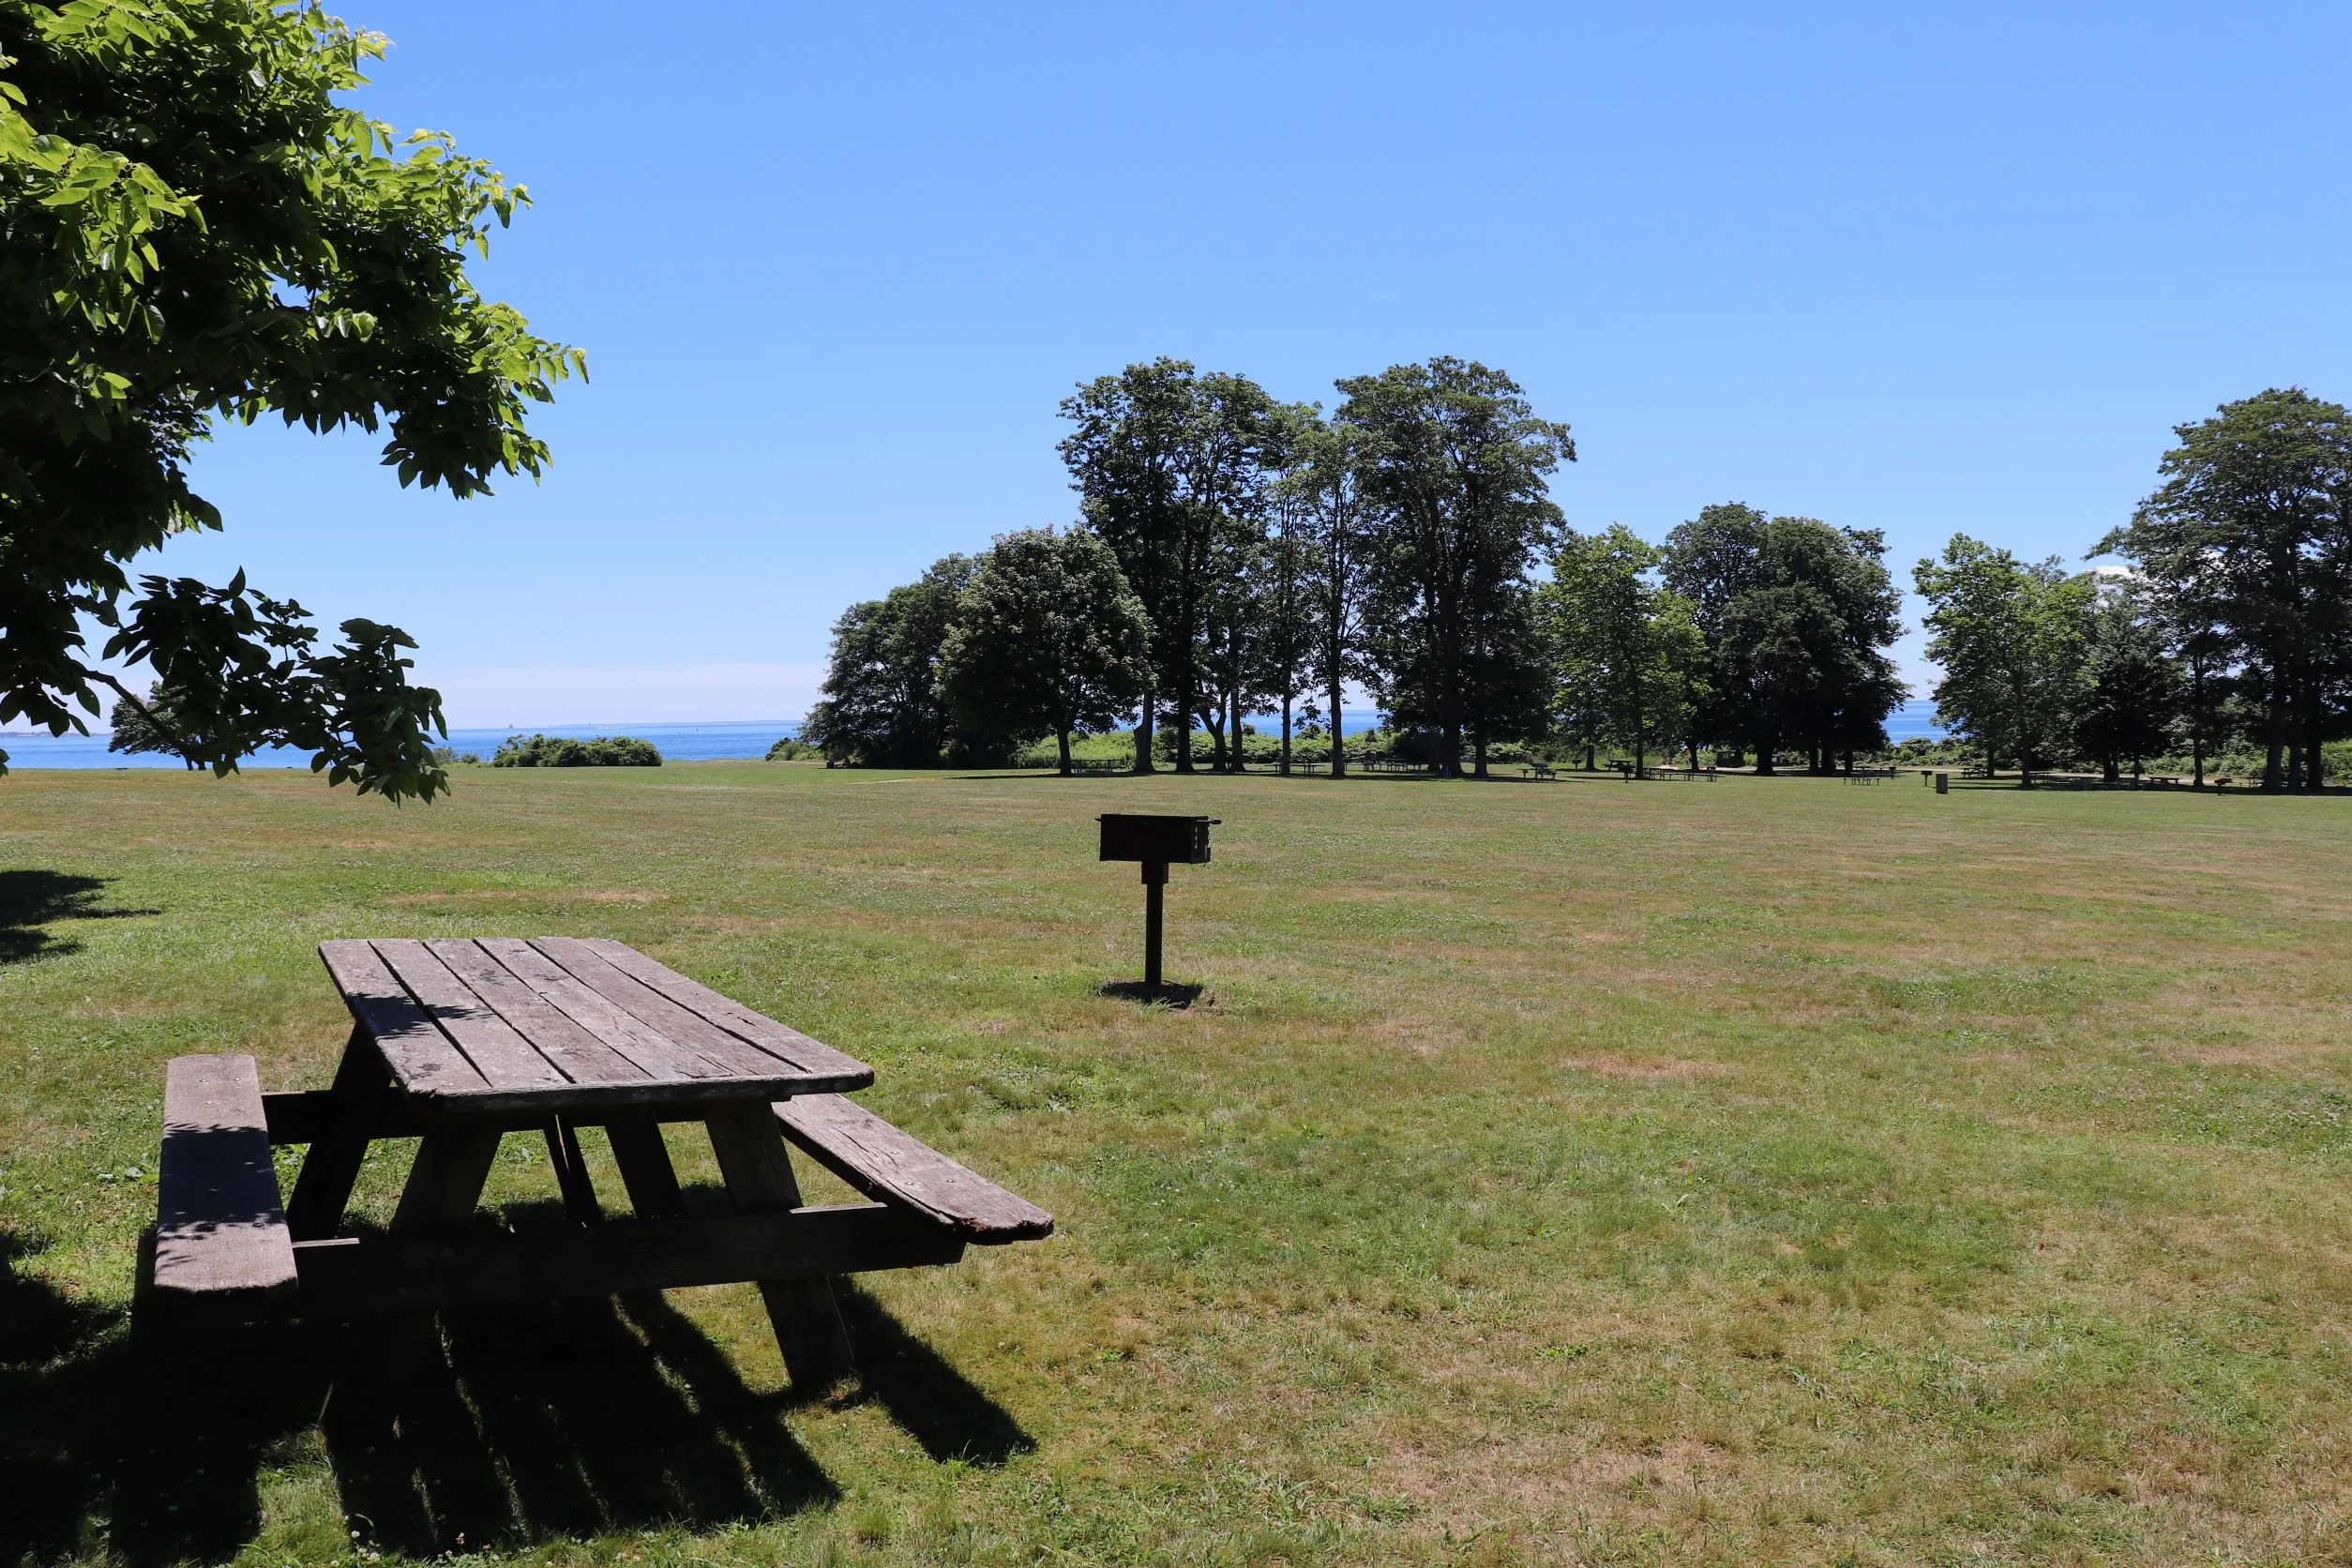 Image of picnic table and grill at harkness park in waterford connecticut.